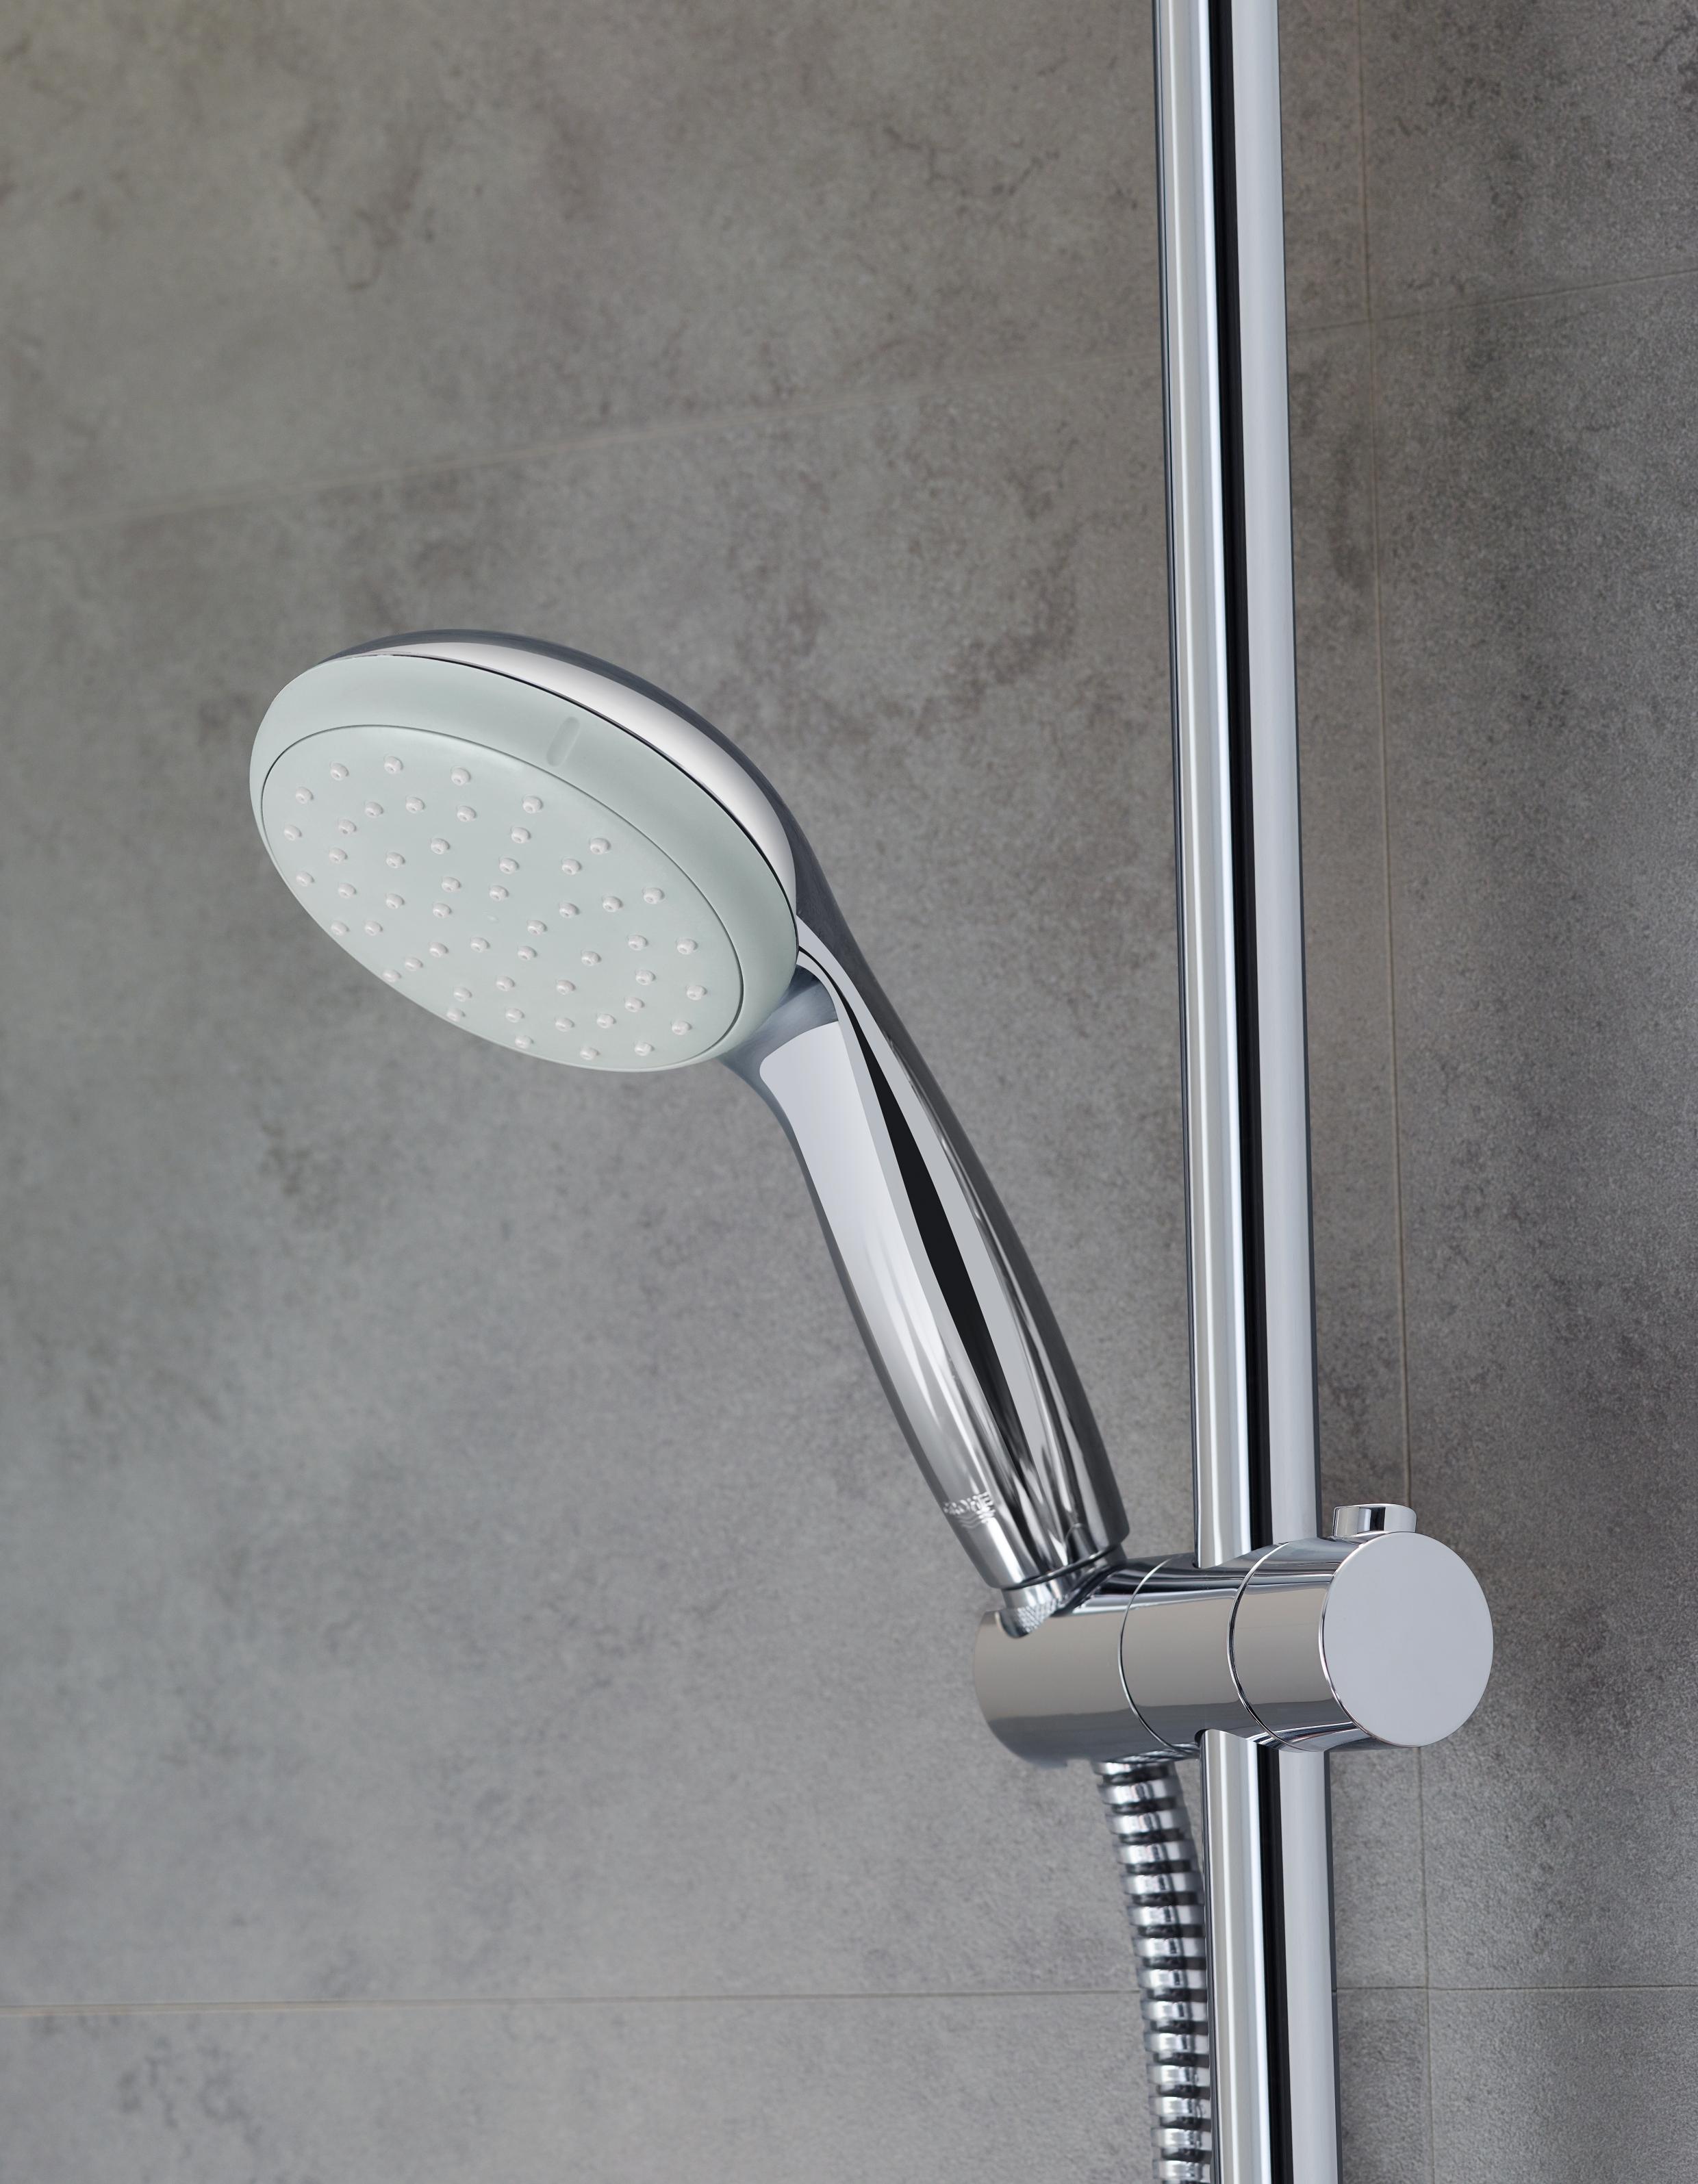 Grohe new 200